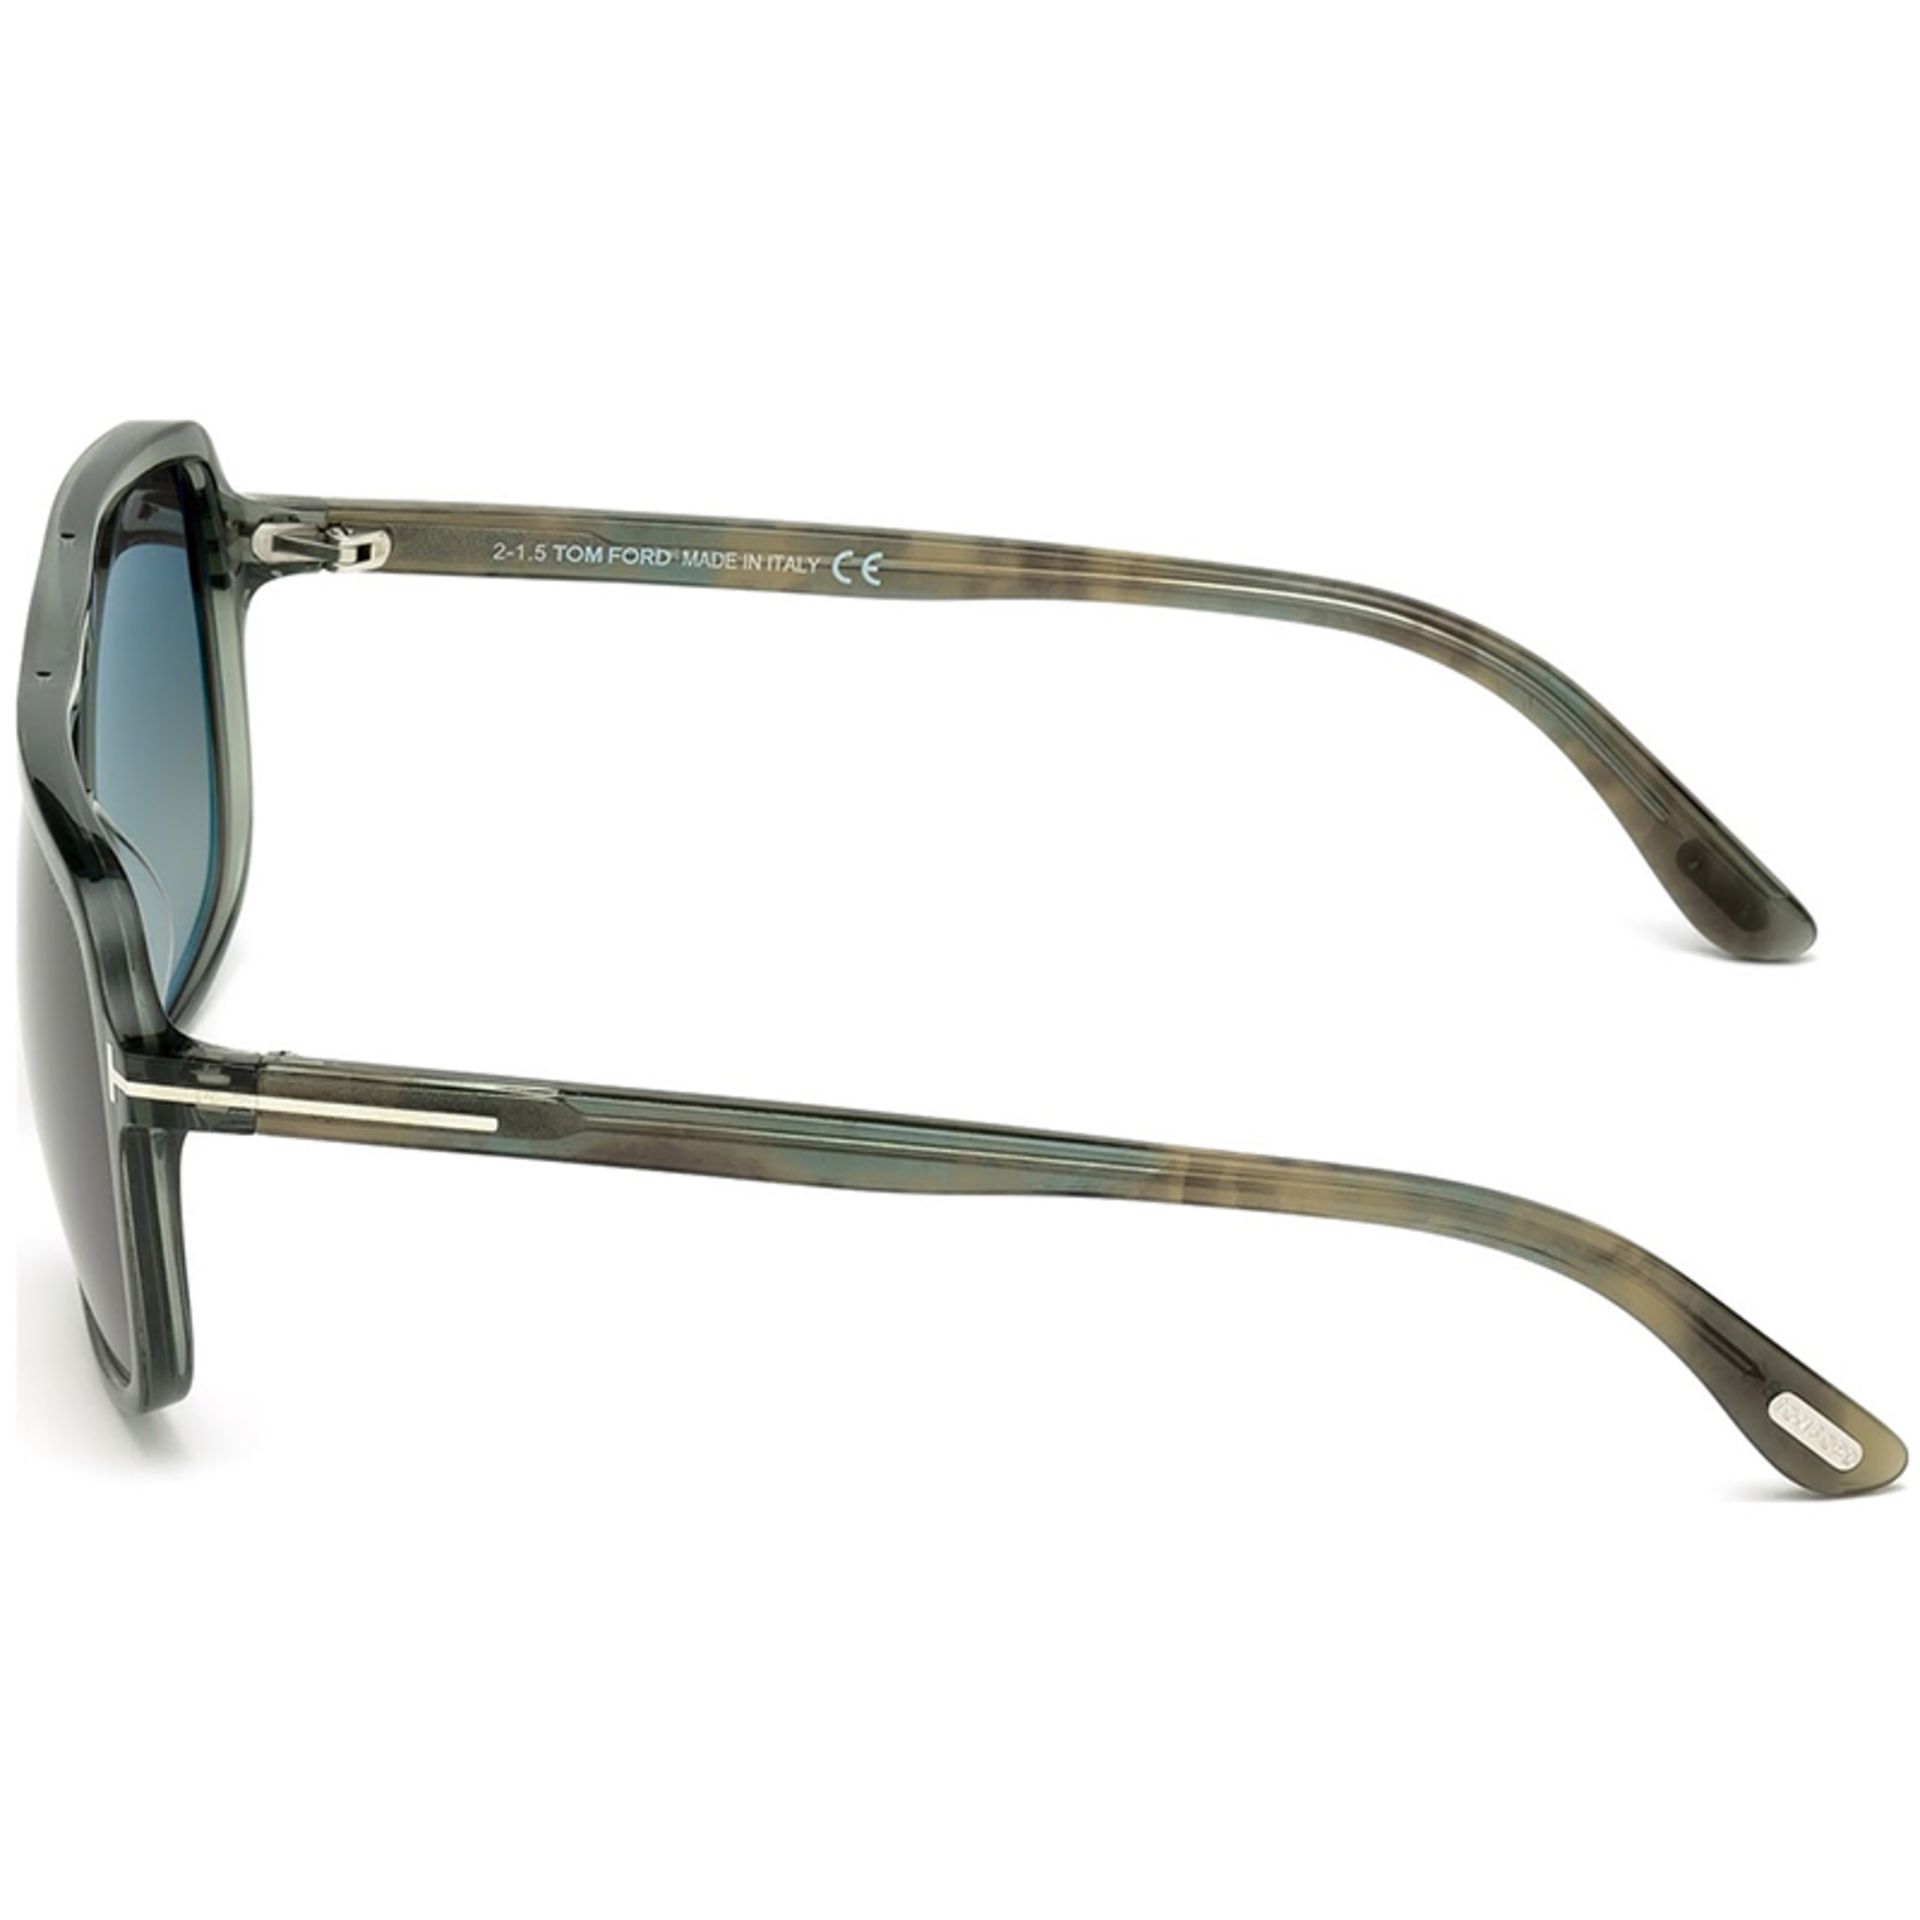 Tom Ford Sunglass ,Male,Model:FT0442 59 96B - Image 2 of 4